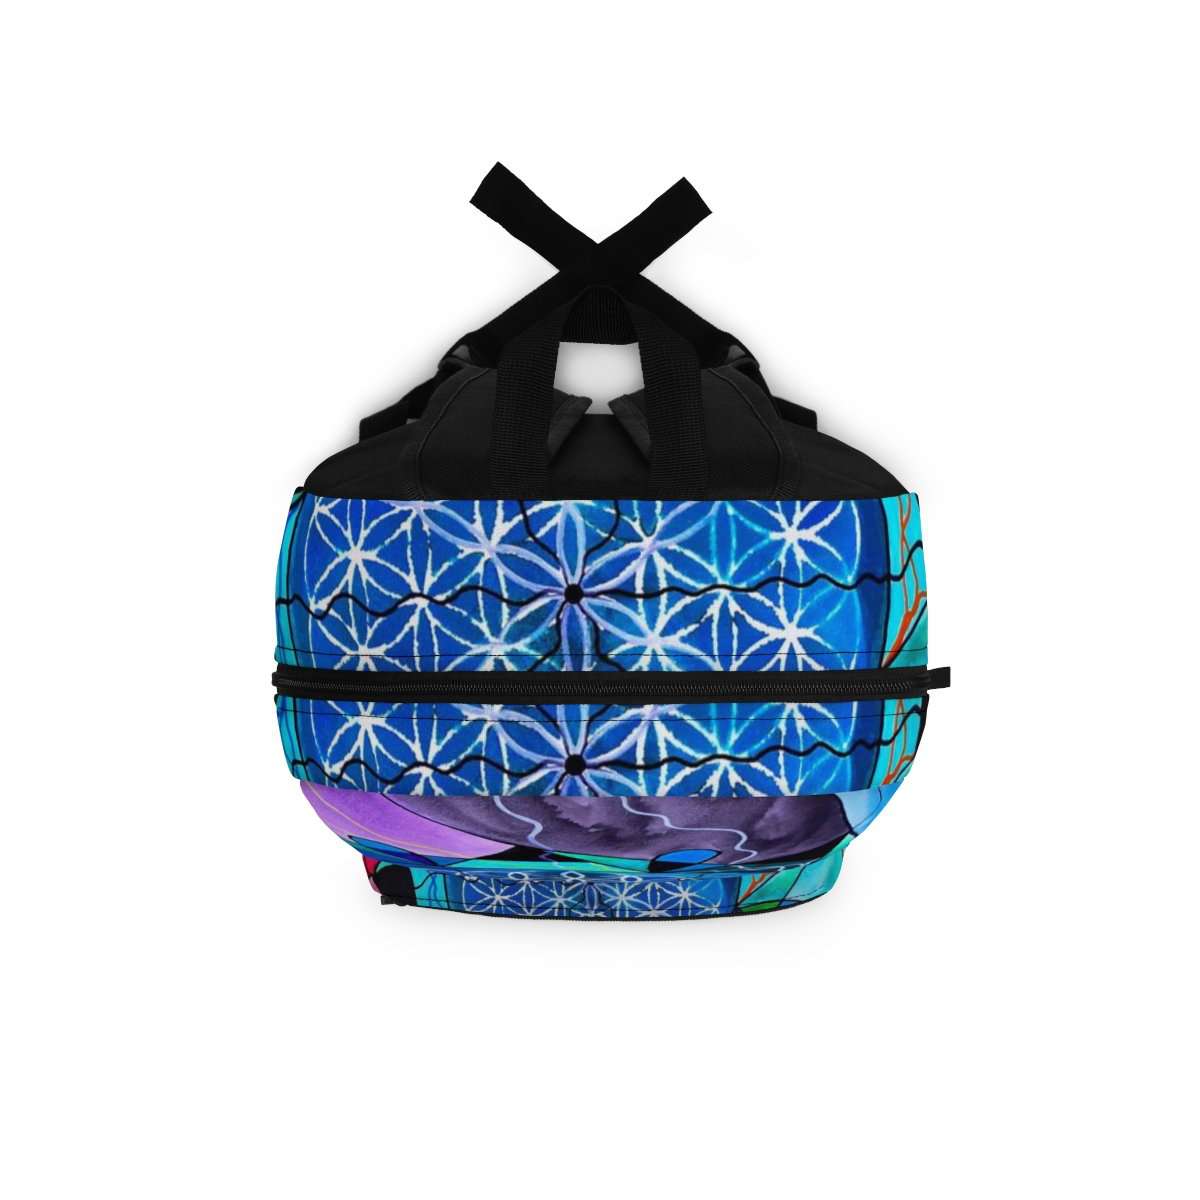 get-your-dream-of-the-flower-of-life-aop-backpack-online-hot-sale_3.jpg